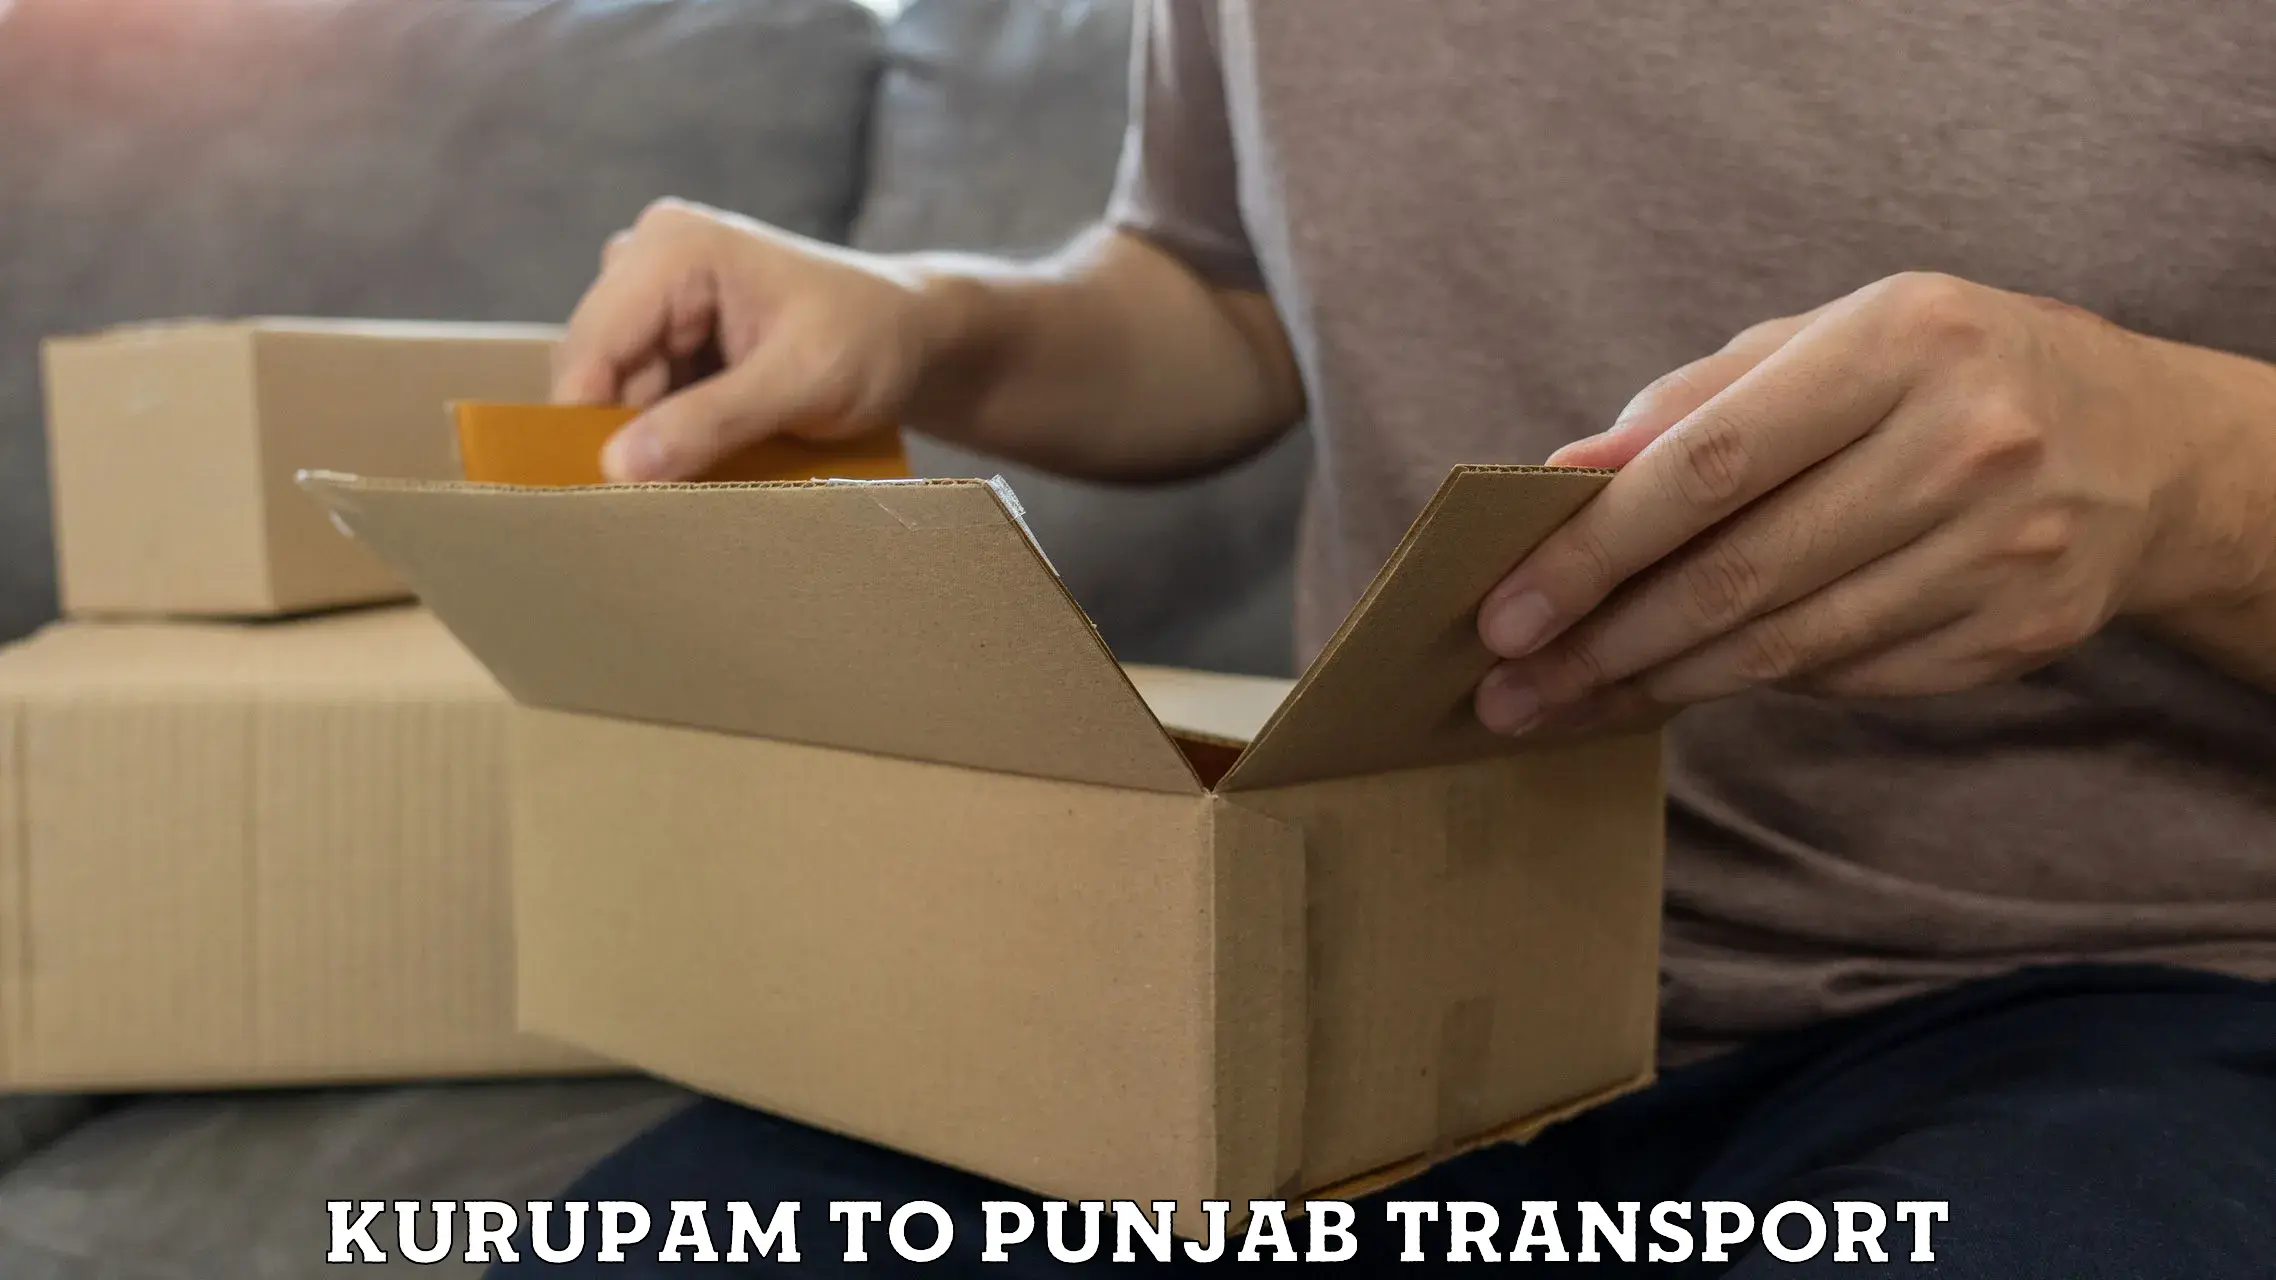 Lorry transport service Kurupam to Thapar Institute of Engineering and Technology Patiala